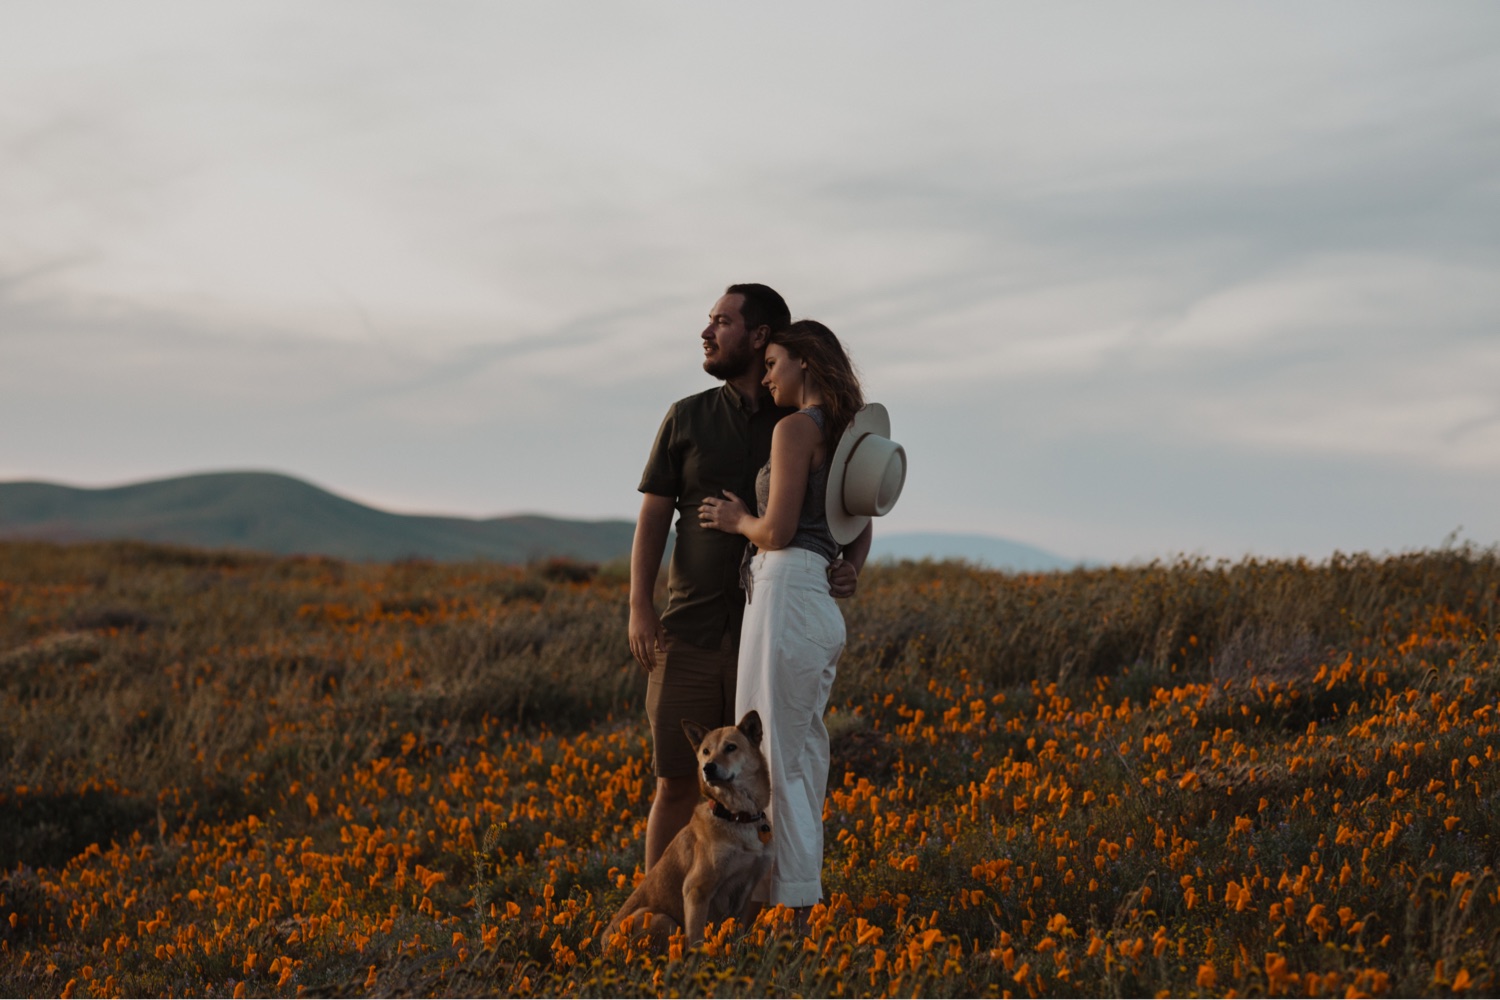 Couples photo session in the California poppy fields